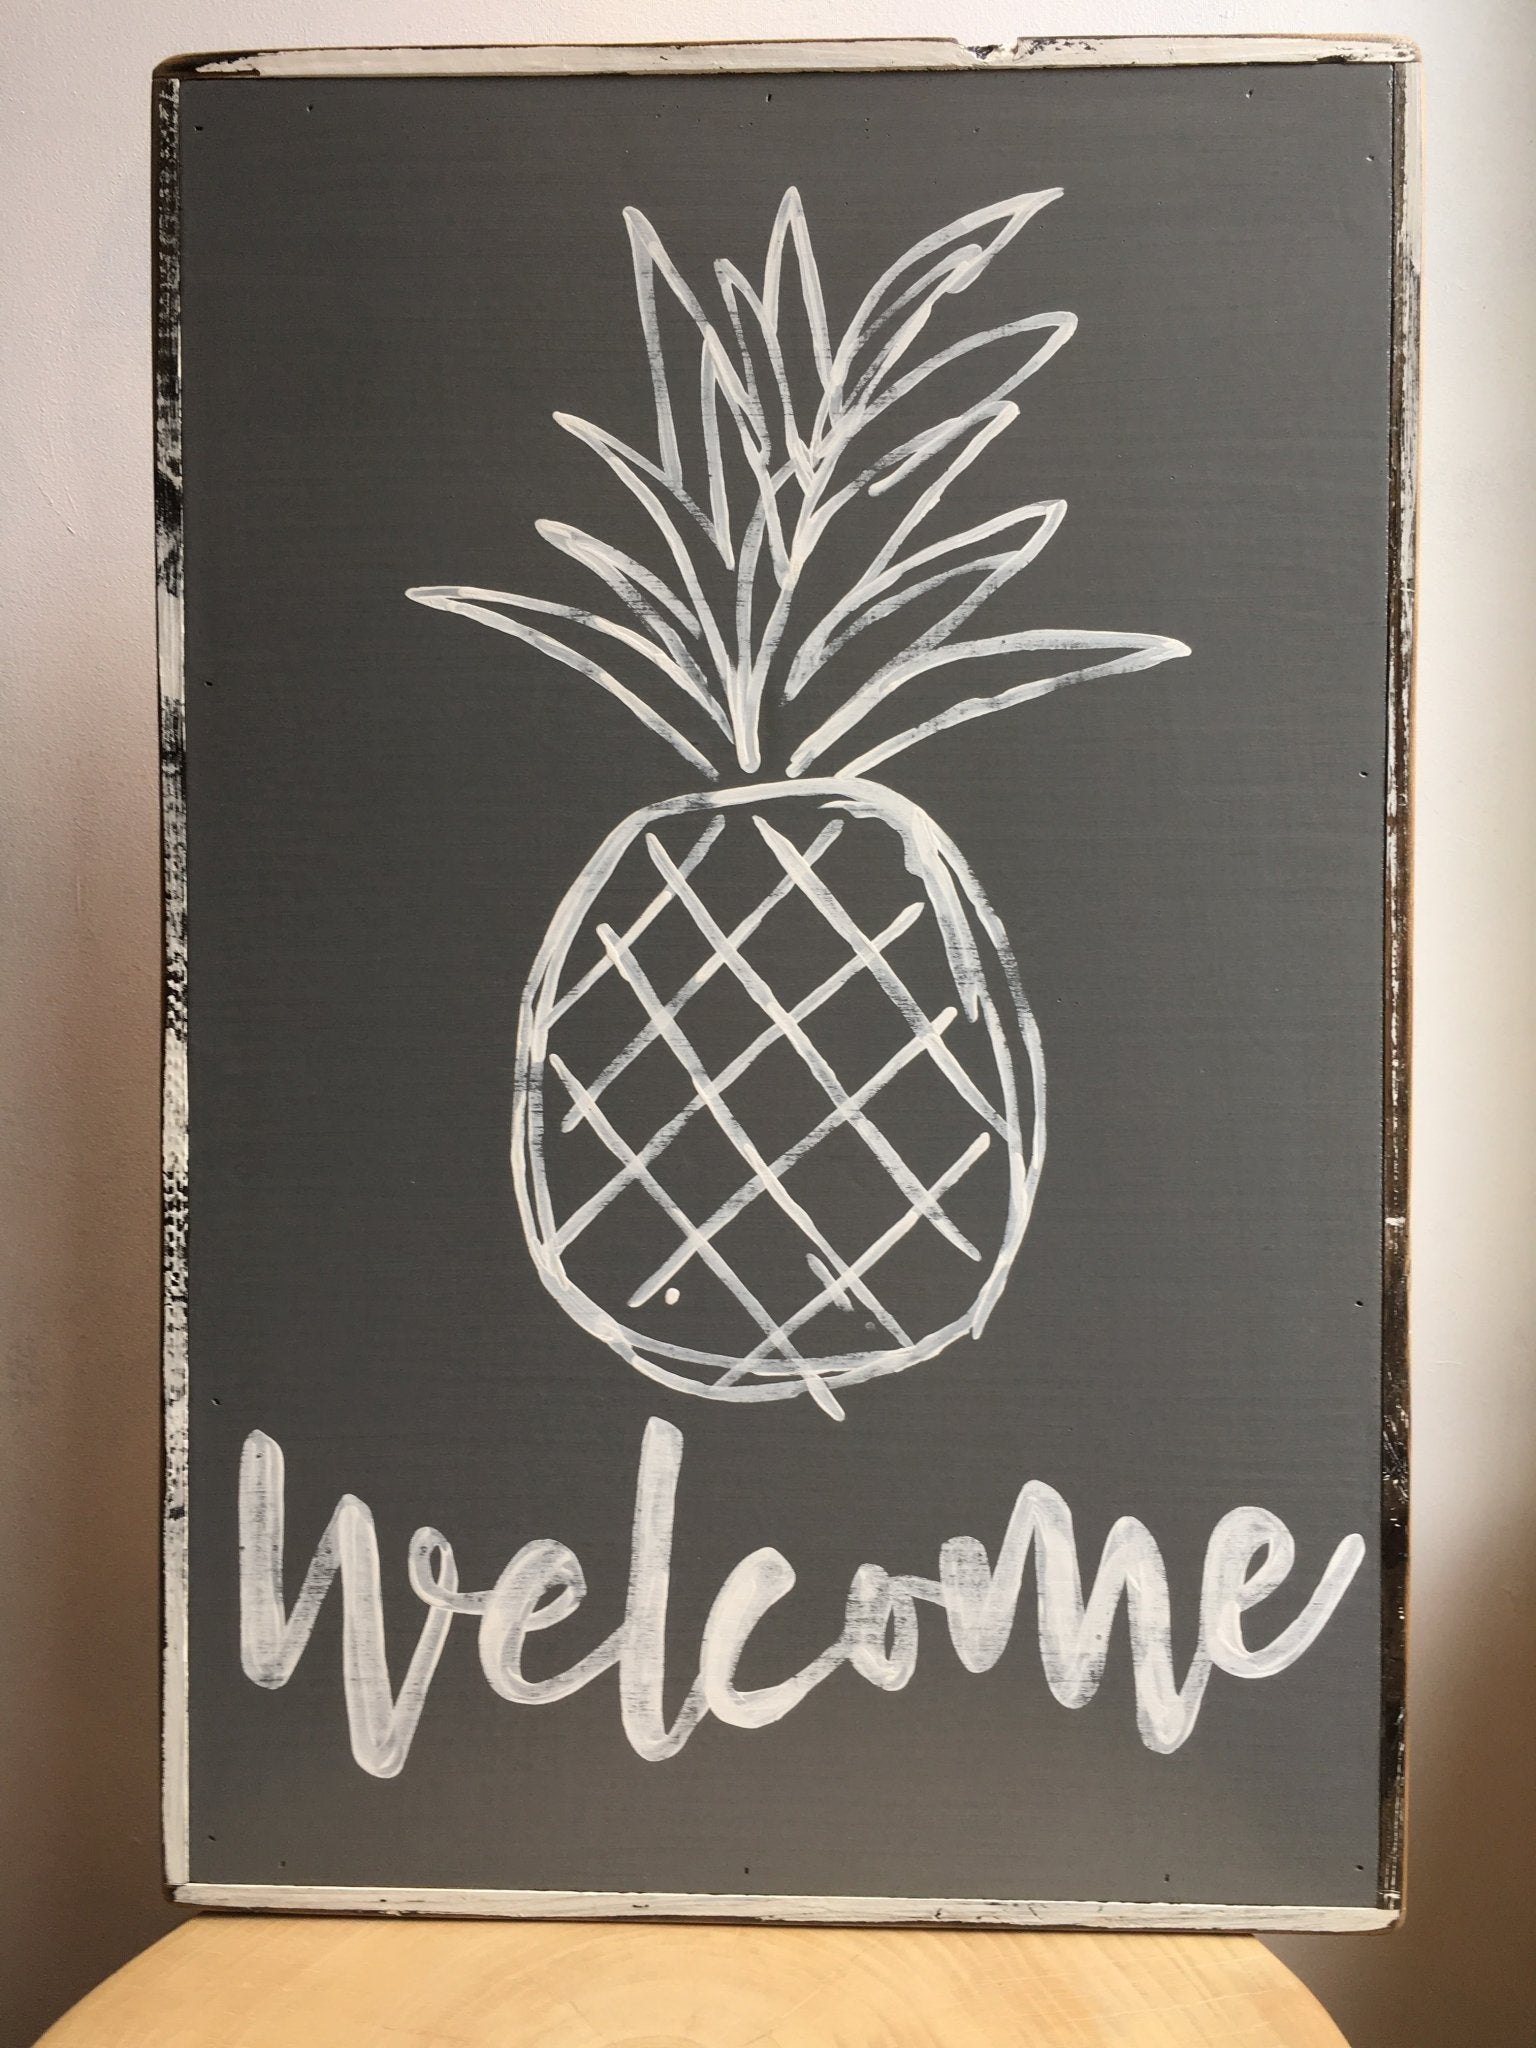 Pineapple Welcome - true RED betty